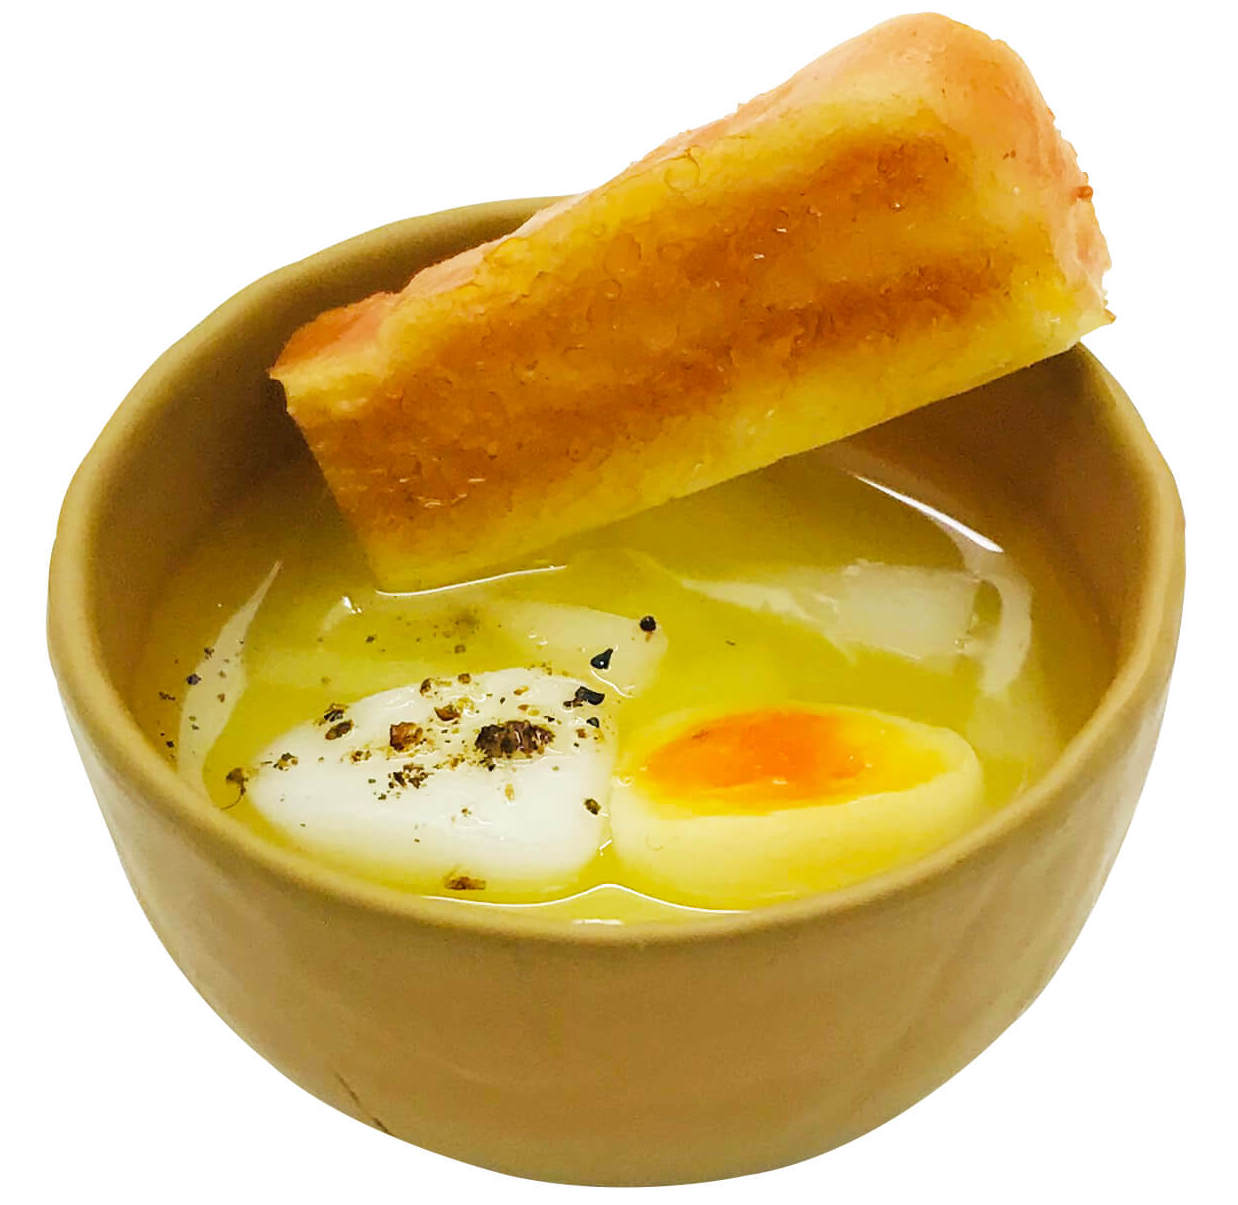 miso soup capsule toy - poached egg with onions